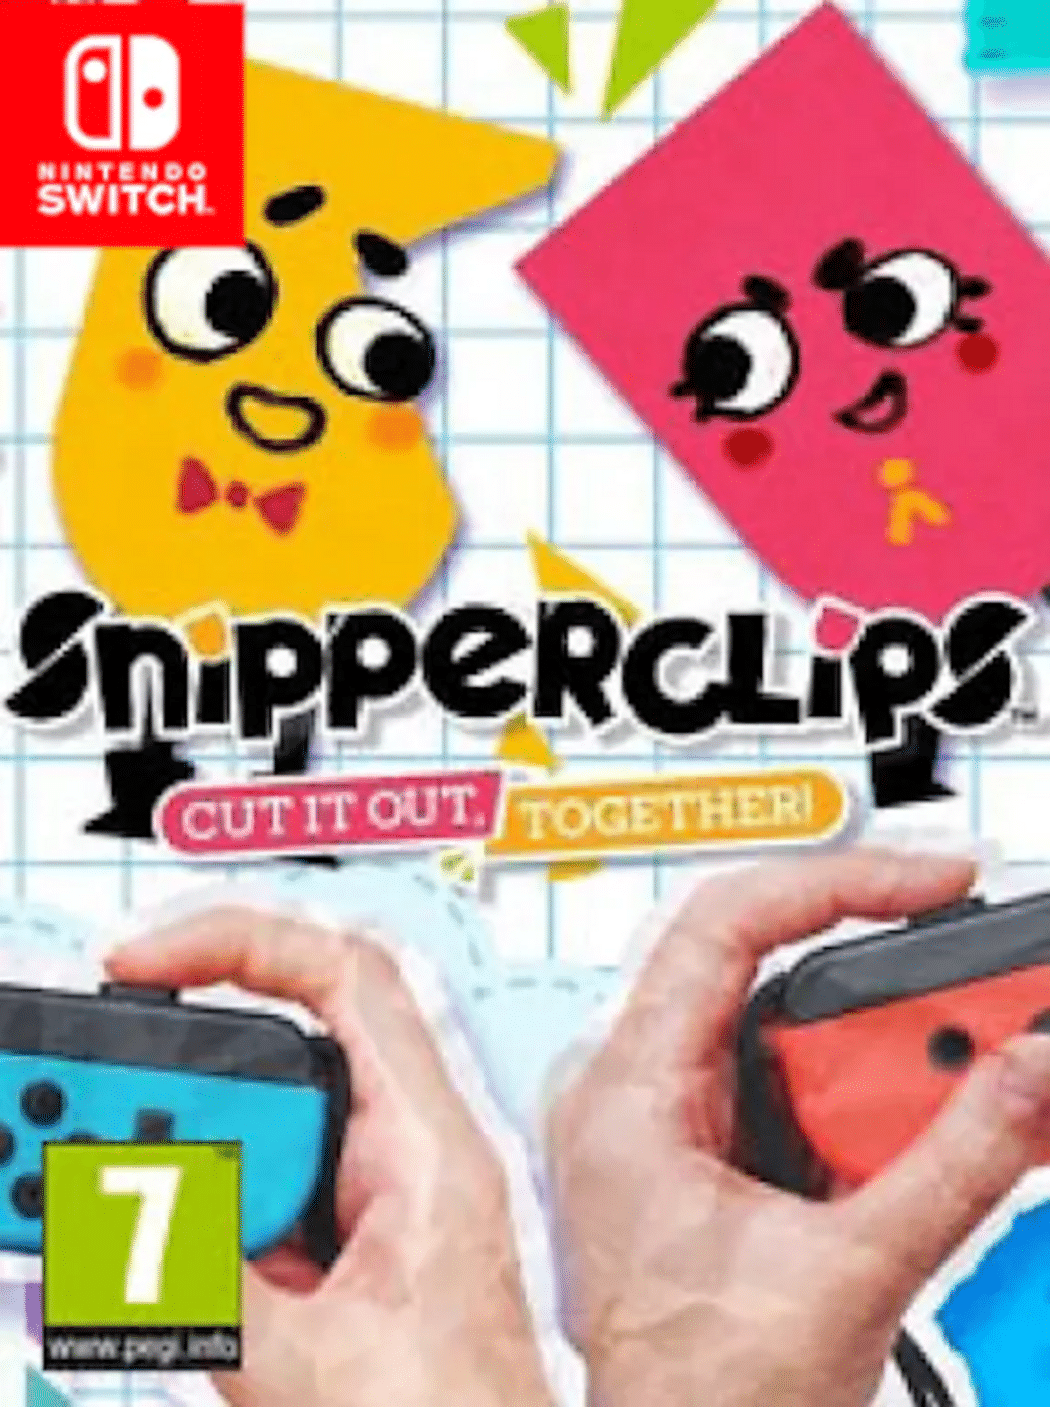 Jogo Nintendo Switch Snipperclips Plus: Cut it out, together